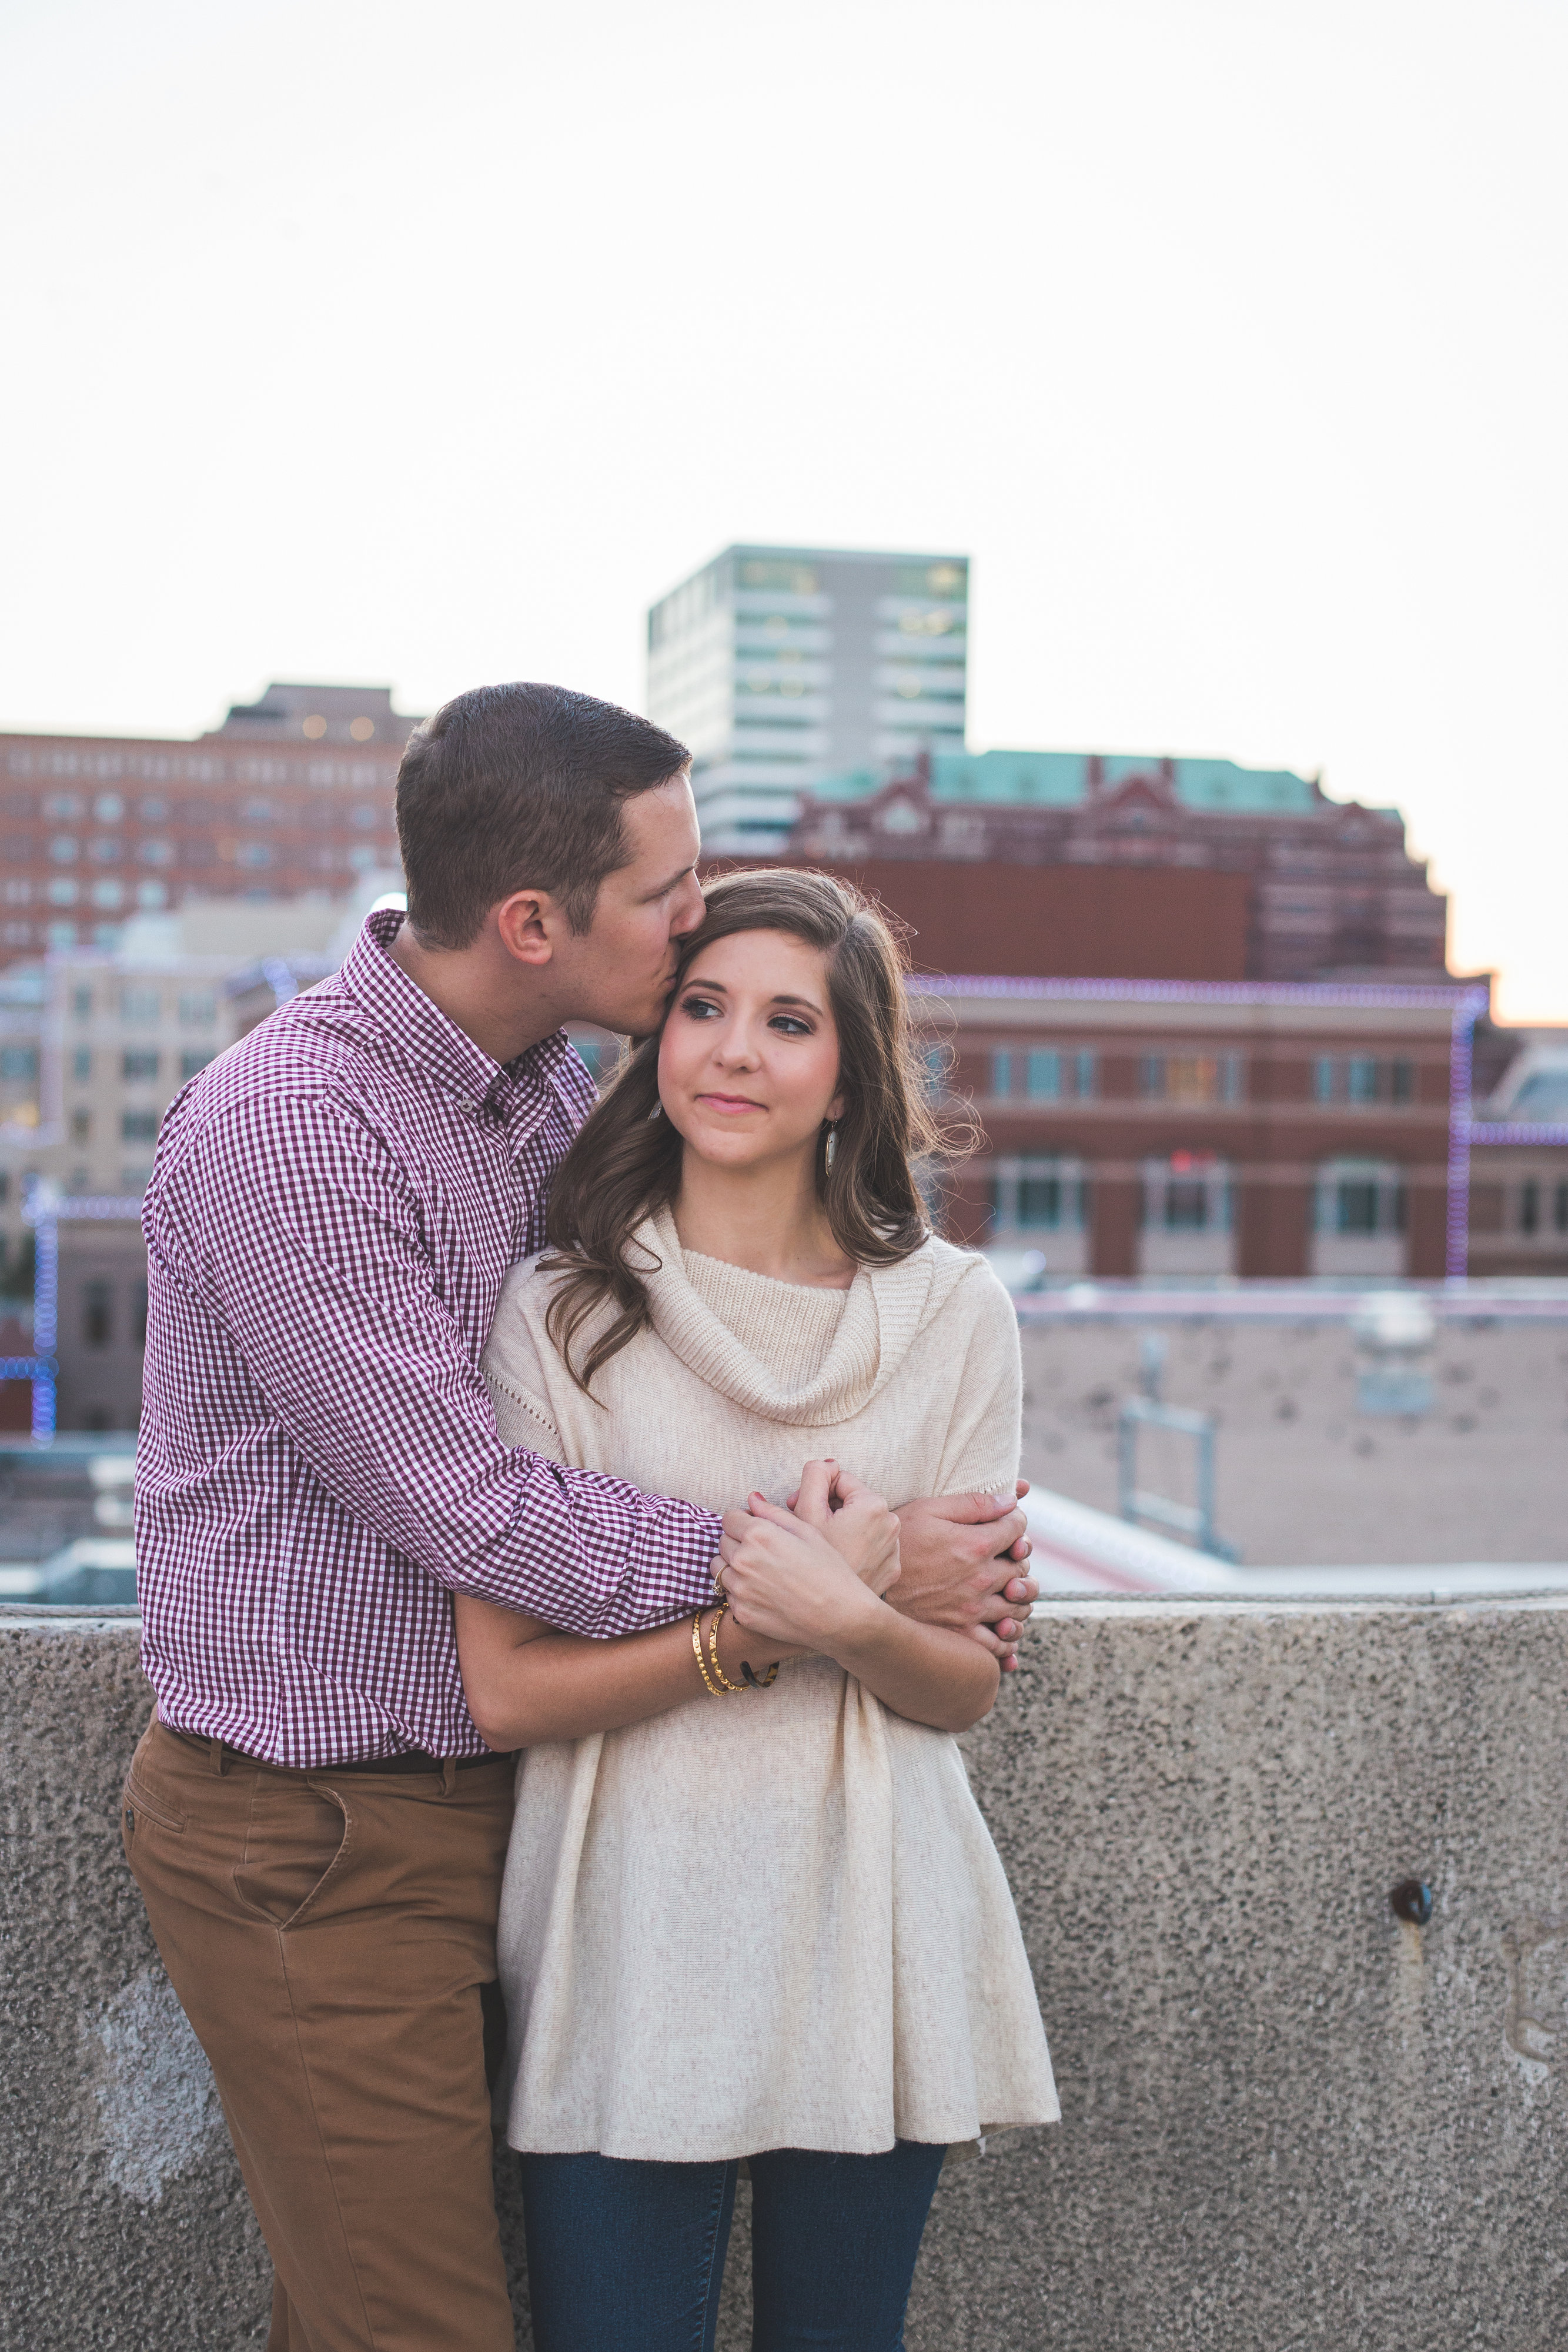 View More: http://margodawnphotography.pass.us/jared-angela-engagements